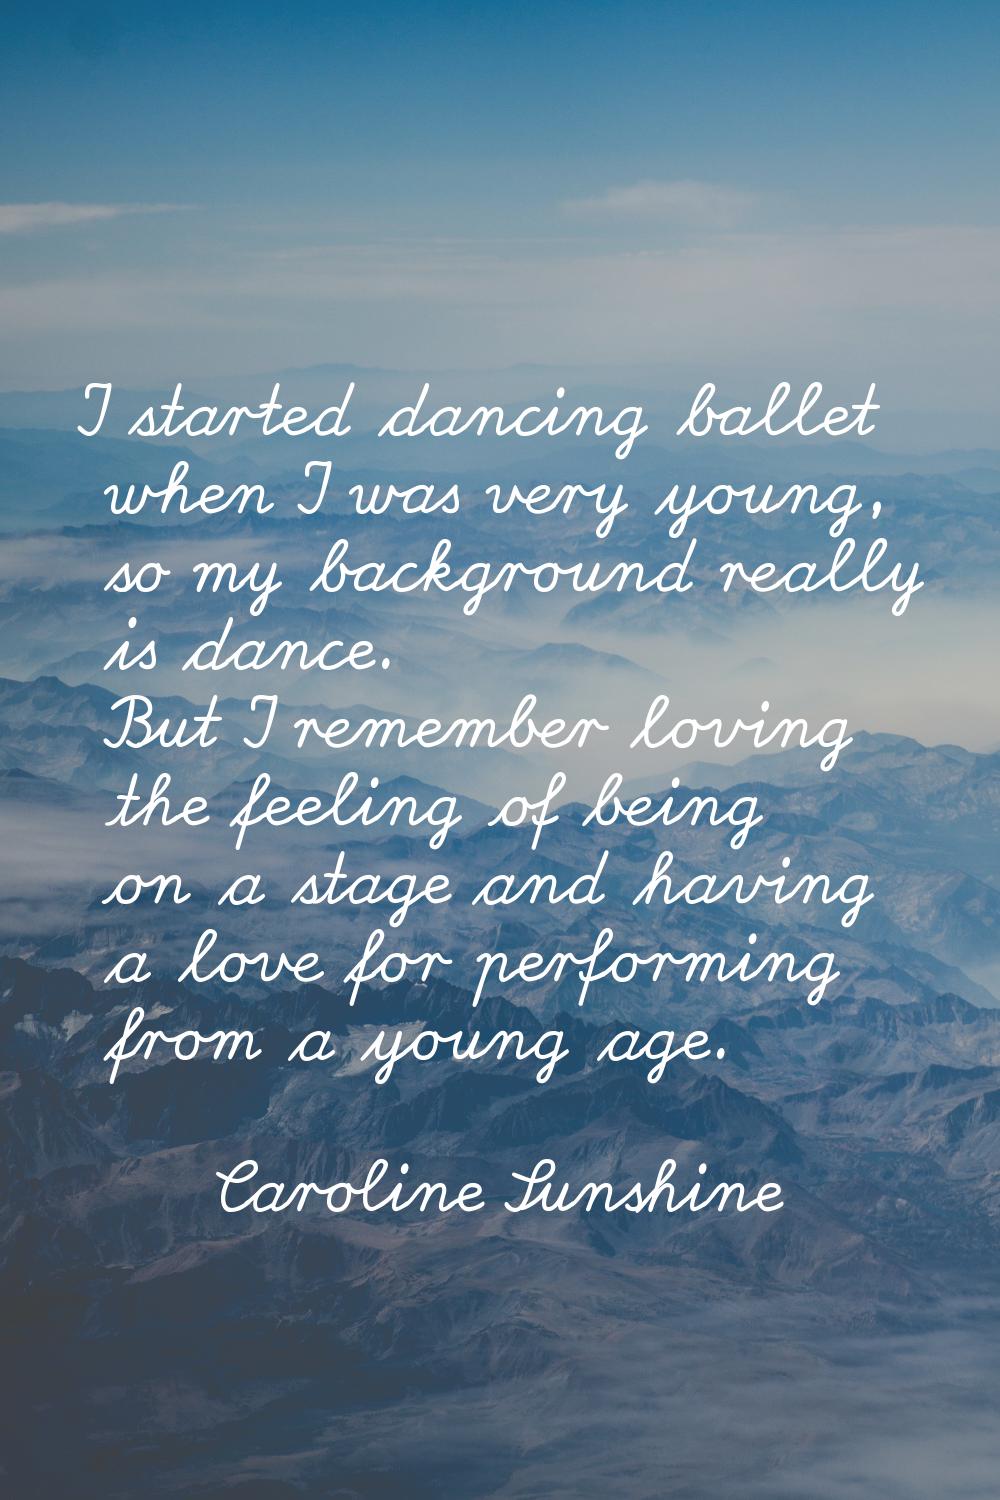 I started dancing ballet when I was very young, so my background really is dance. But I remember lo